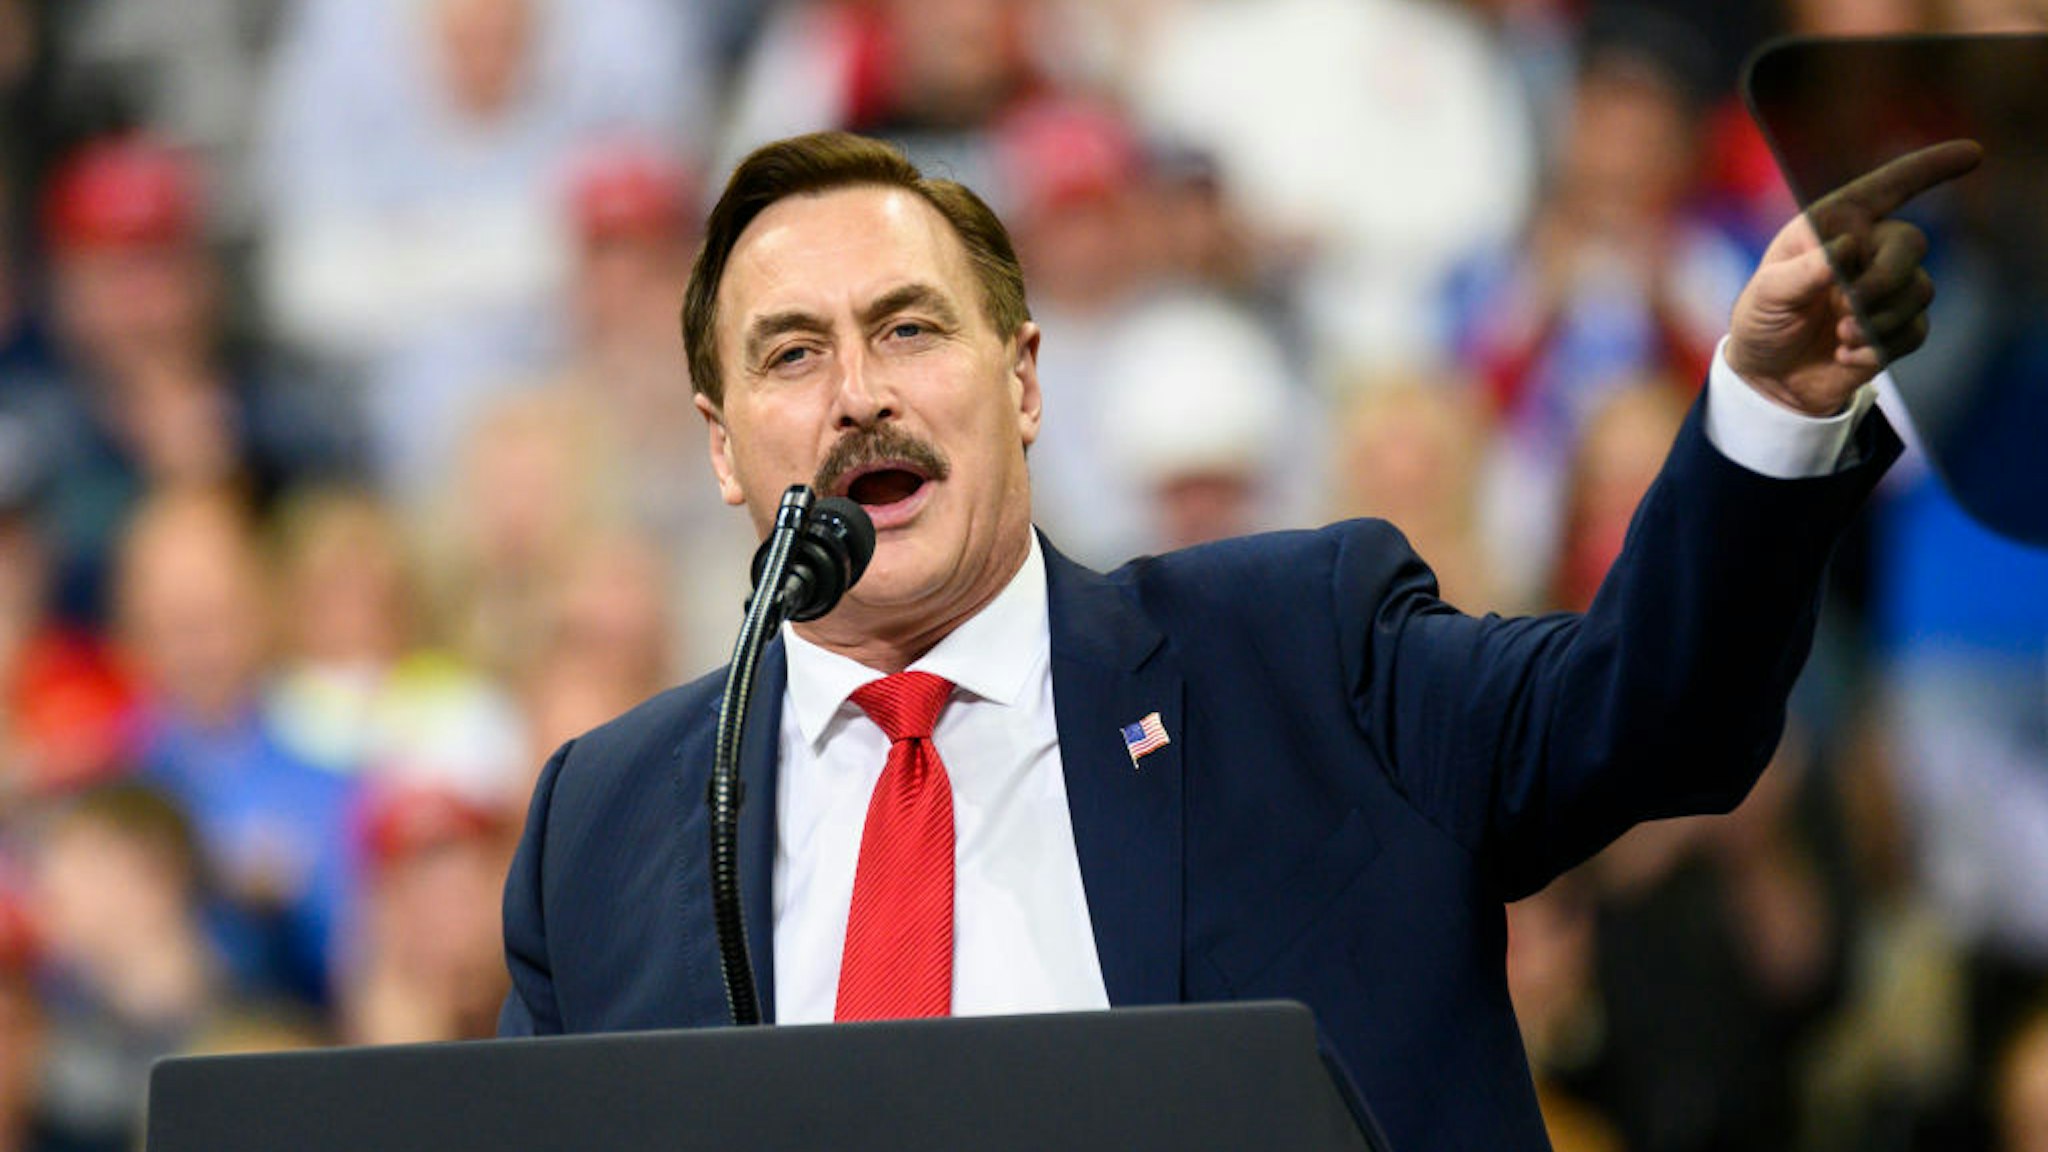 Mike Lindell, CEO of My Pillow, speaks during a campaign rally held by U.S. President Donald Trump at the Target Center on October 10, 2019 in Minneapolis, Minnesota.